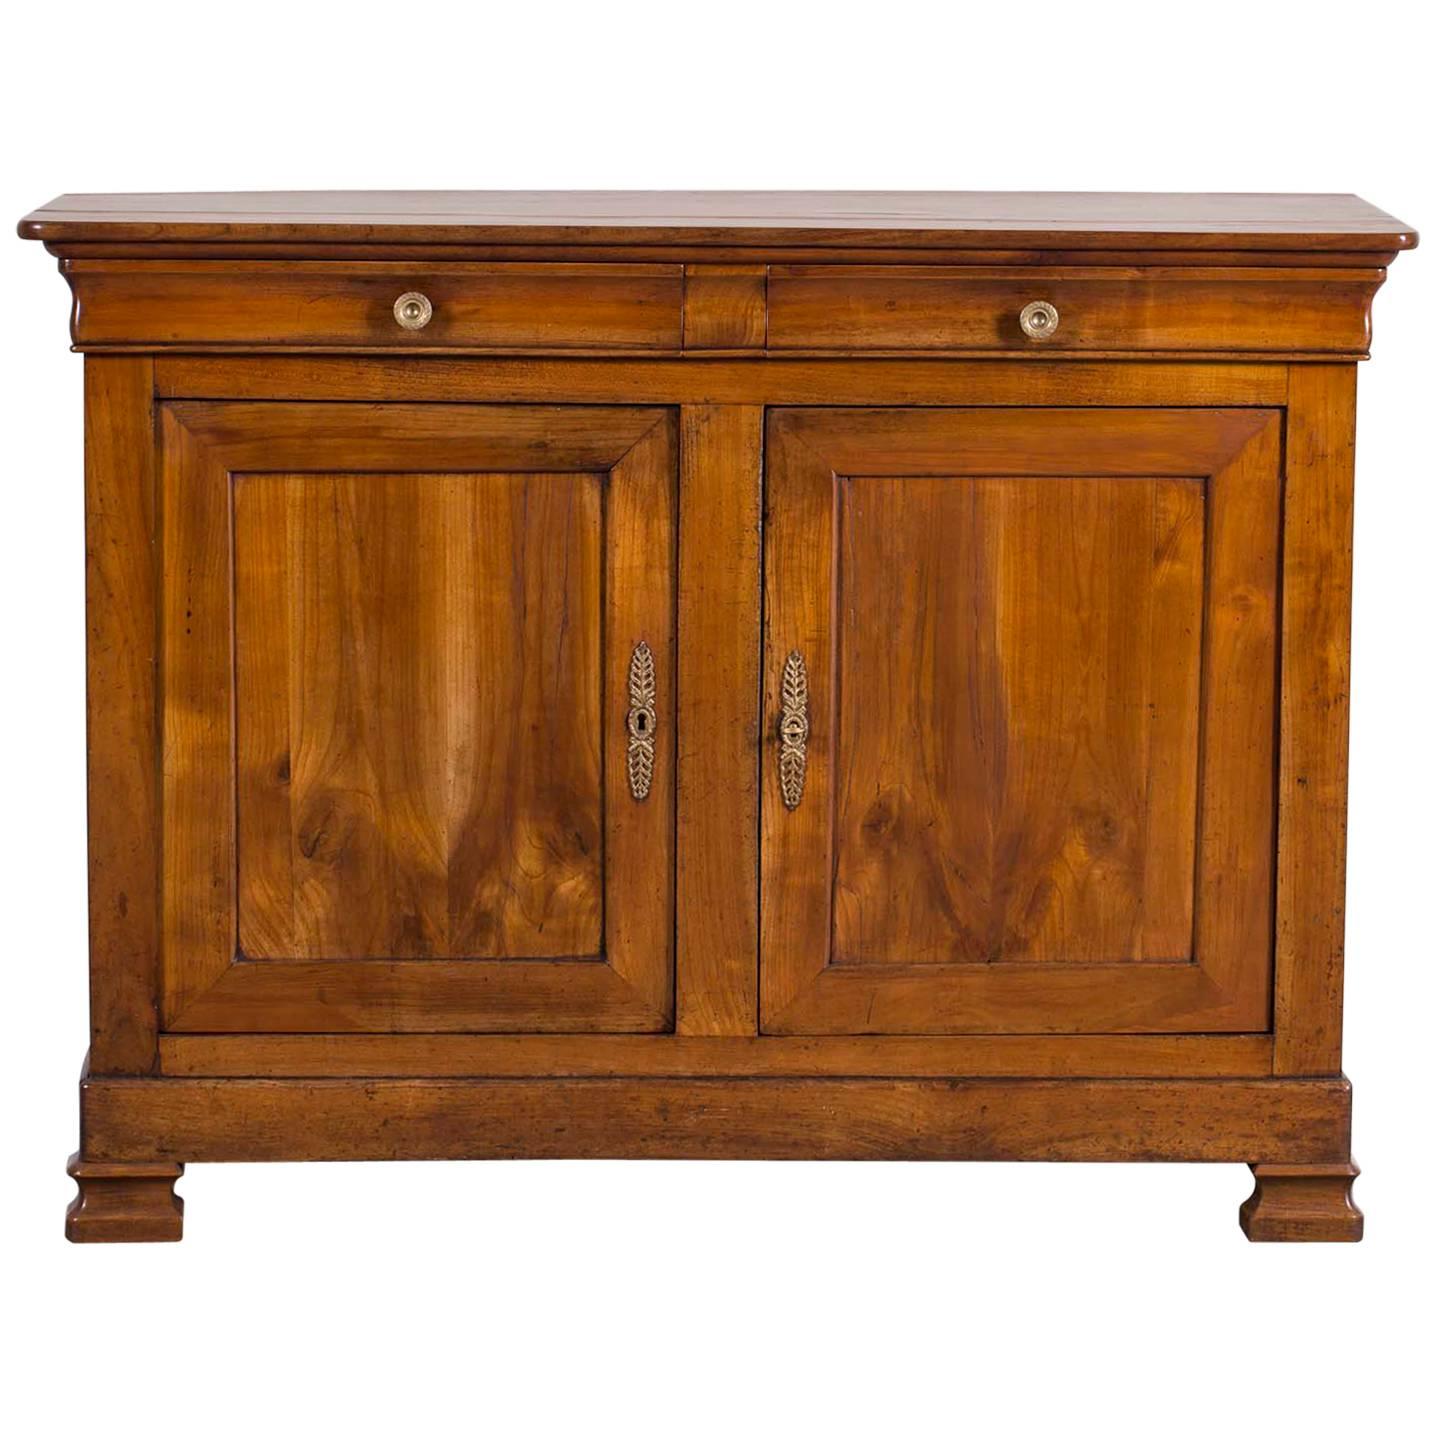 Antique French Louis Philippe Cherrywood Credenza Buffet, circa 1850